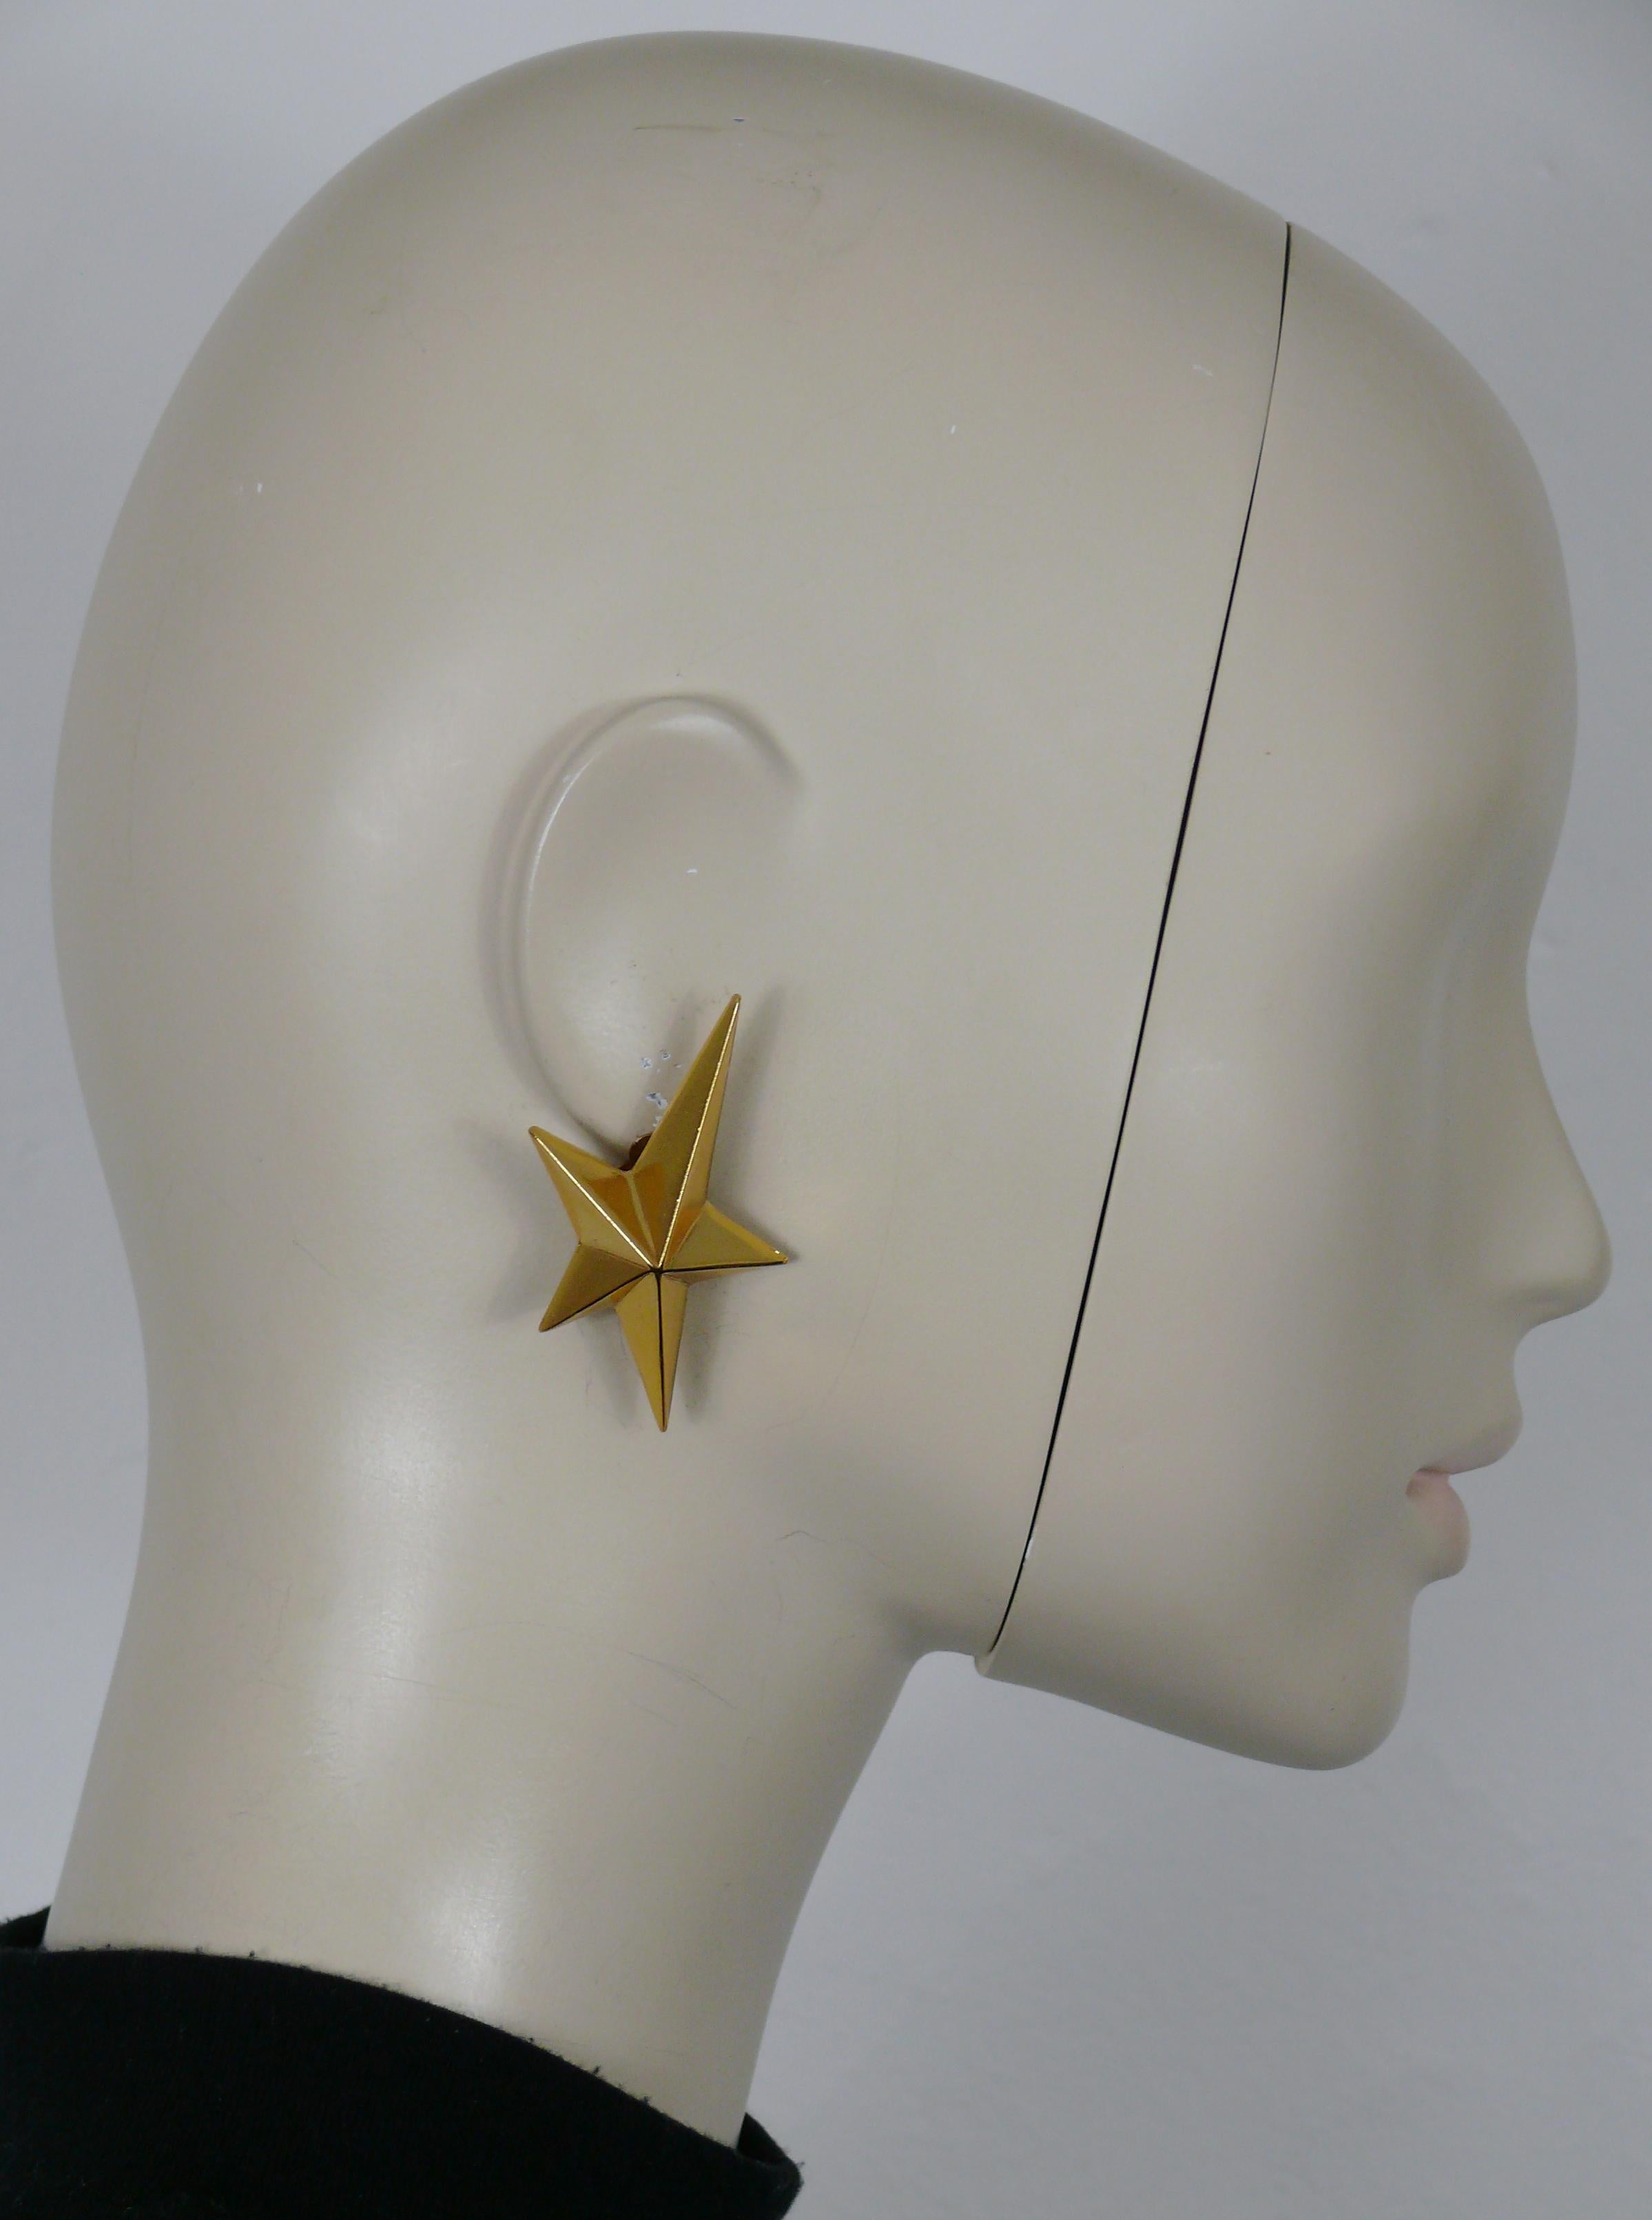 THIERRY MUGLER vintage iconic gold tone star clip-on earrings.

Embossed TM.

Indicative measurements : max. height approx. 5.4 cm (2.13 inches) / max. width approx. 2.8 cm (1.10 inch).

Weight per earring : approx. 14 grams.

Material : Gold tone